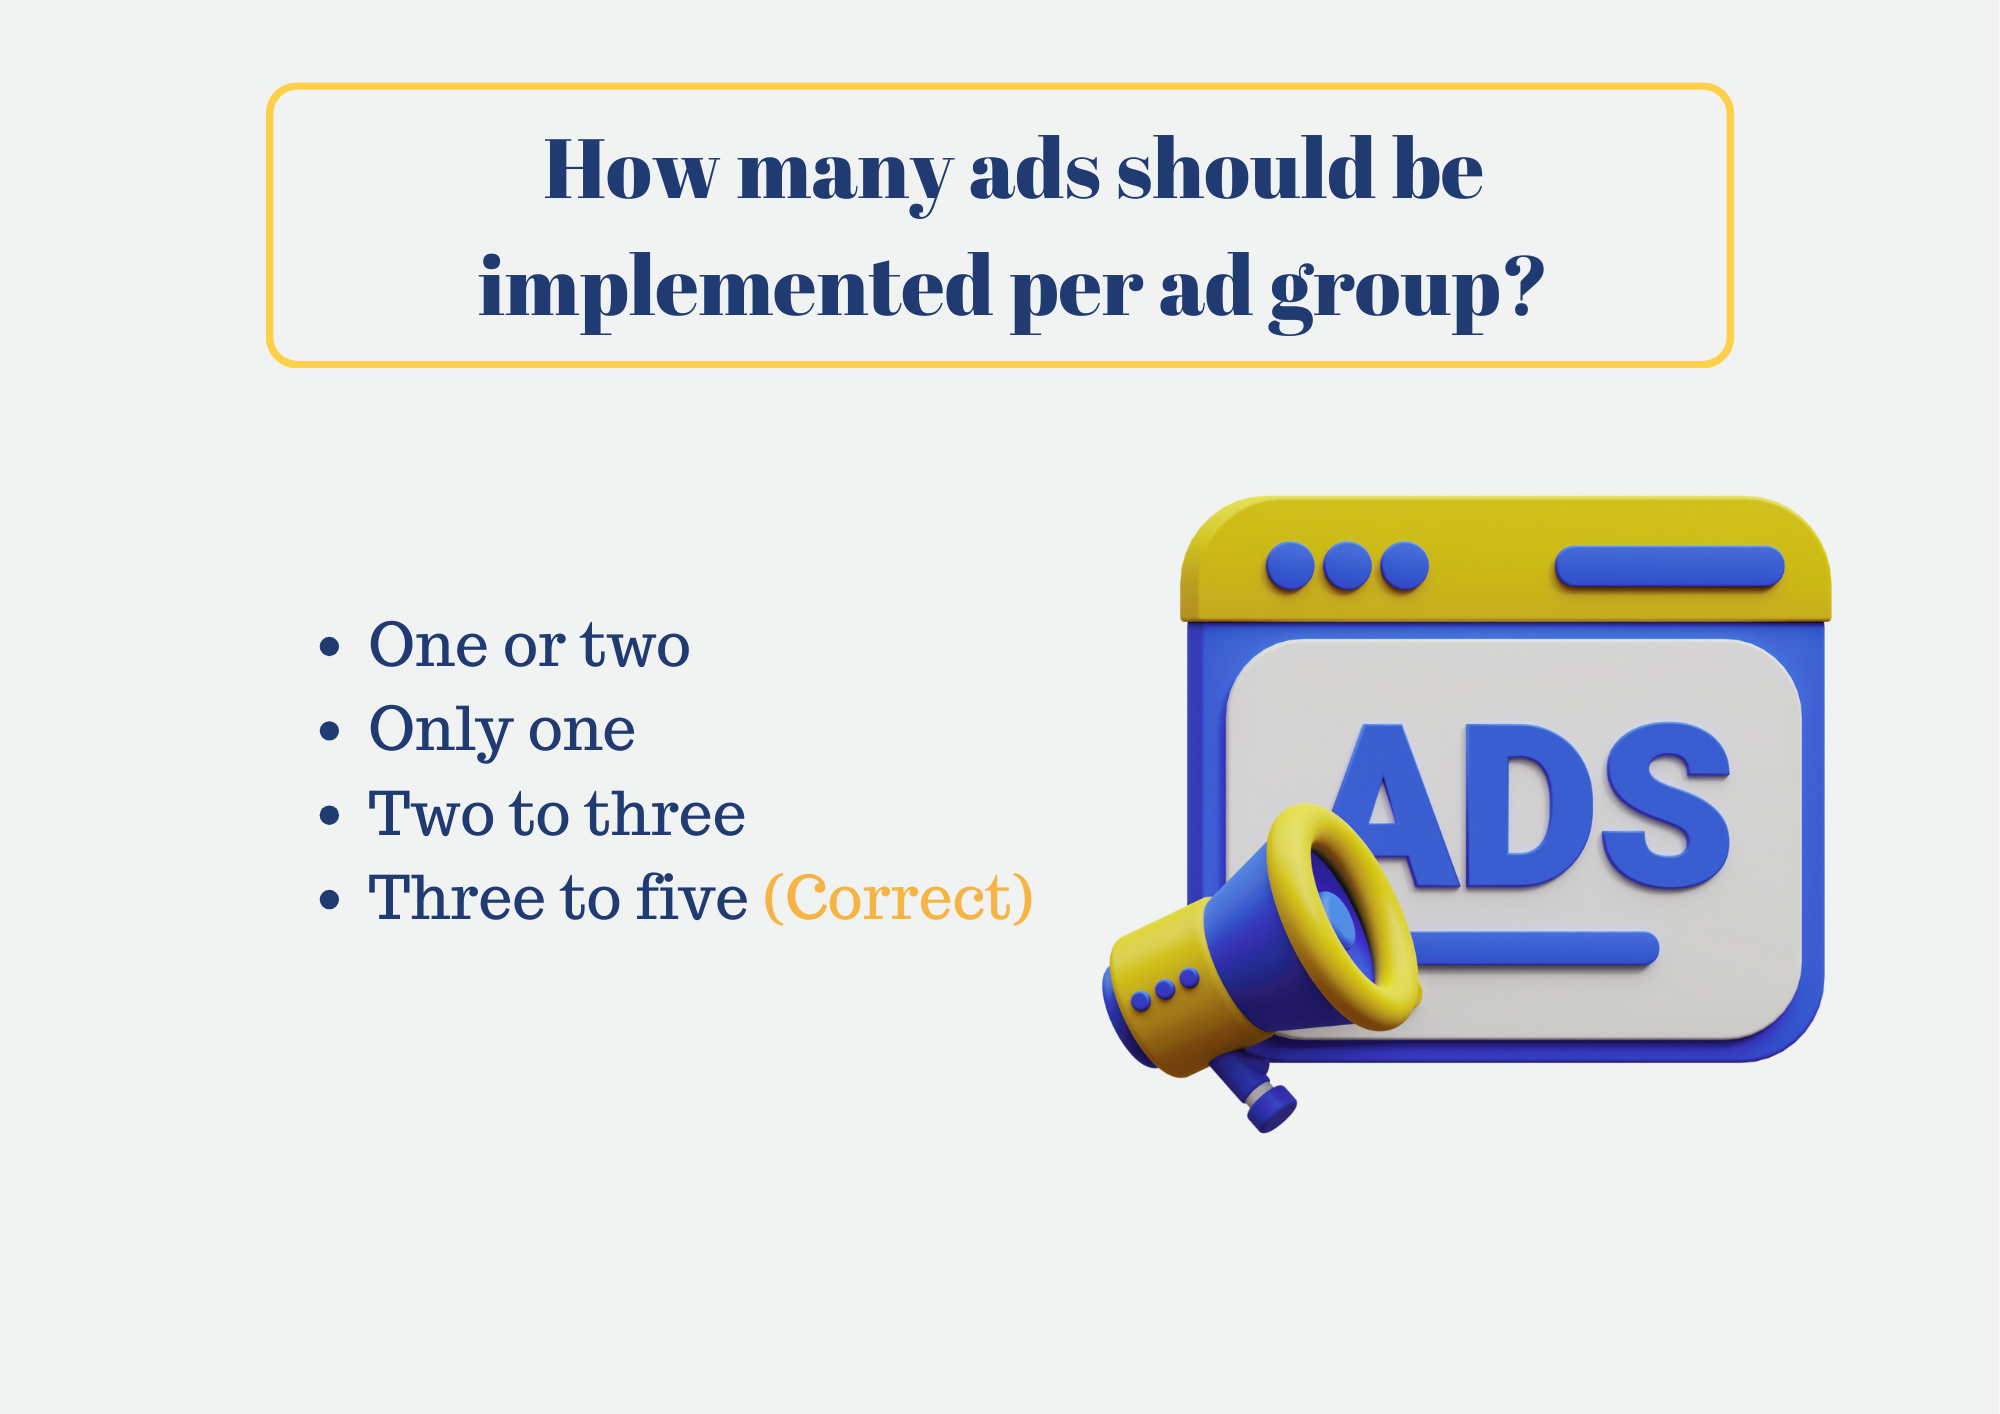 How many ads should be implemented per ad group